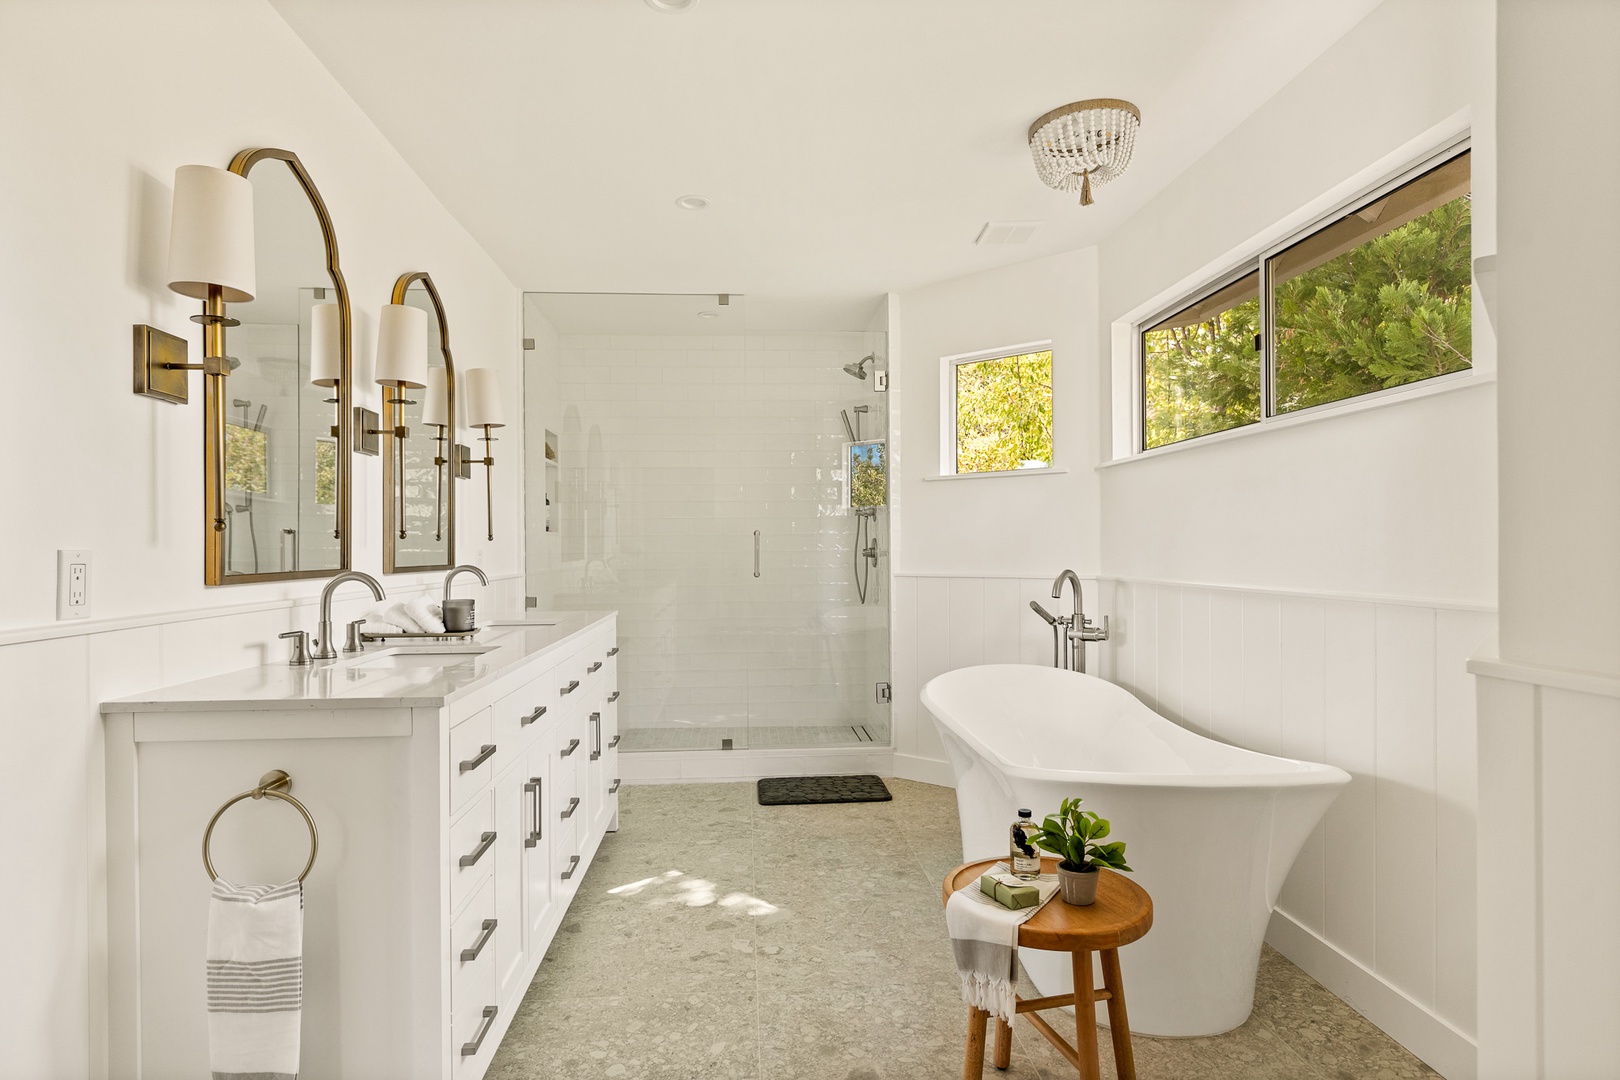 Bathroom #1 Unwind in this spa-like bathroom with steam shower, bench seating, and garden tub